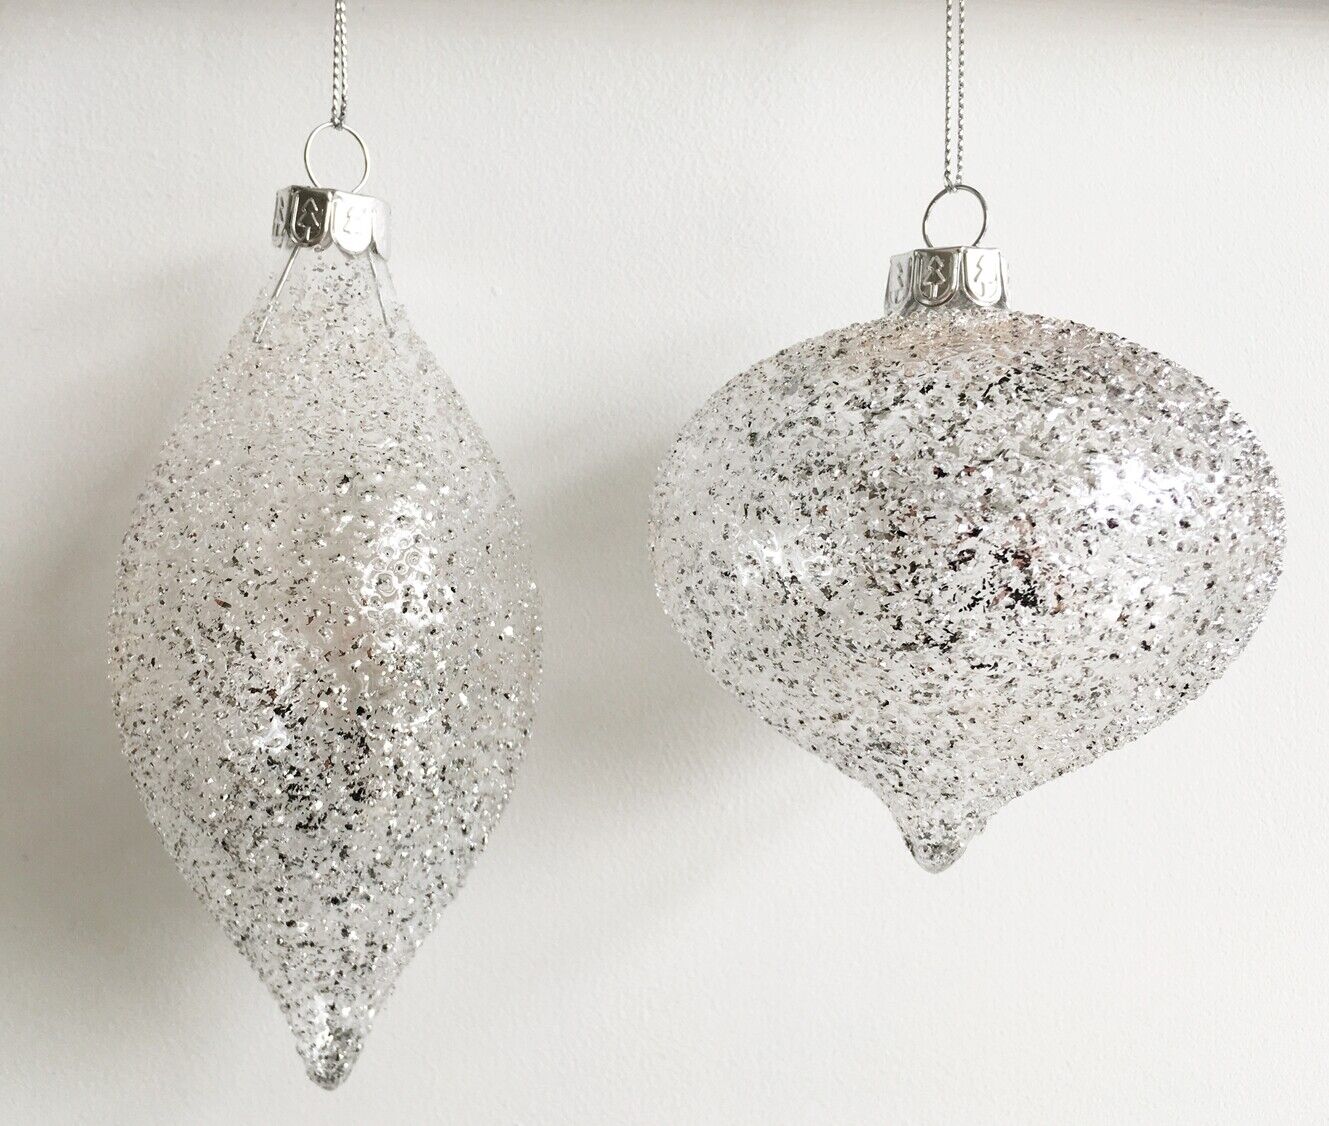 Set of 2 Clear Christmas Baubles with Silver Sandblast Glitter Detail